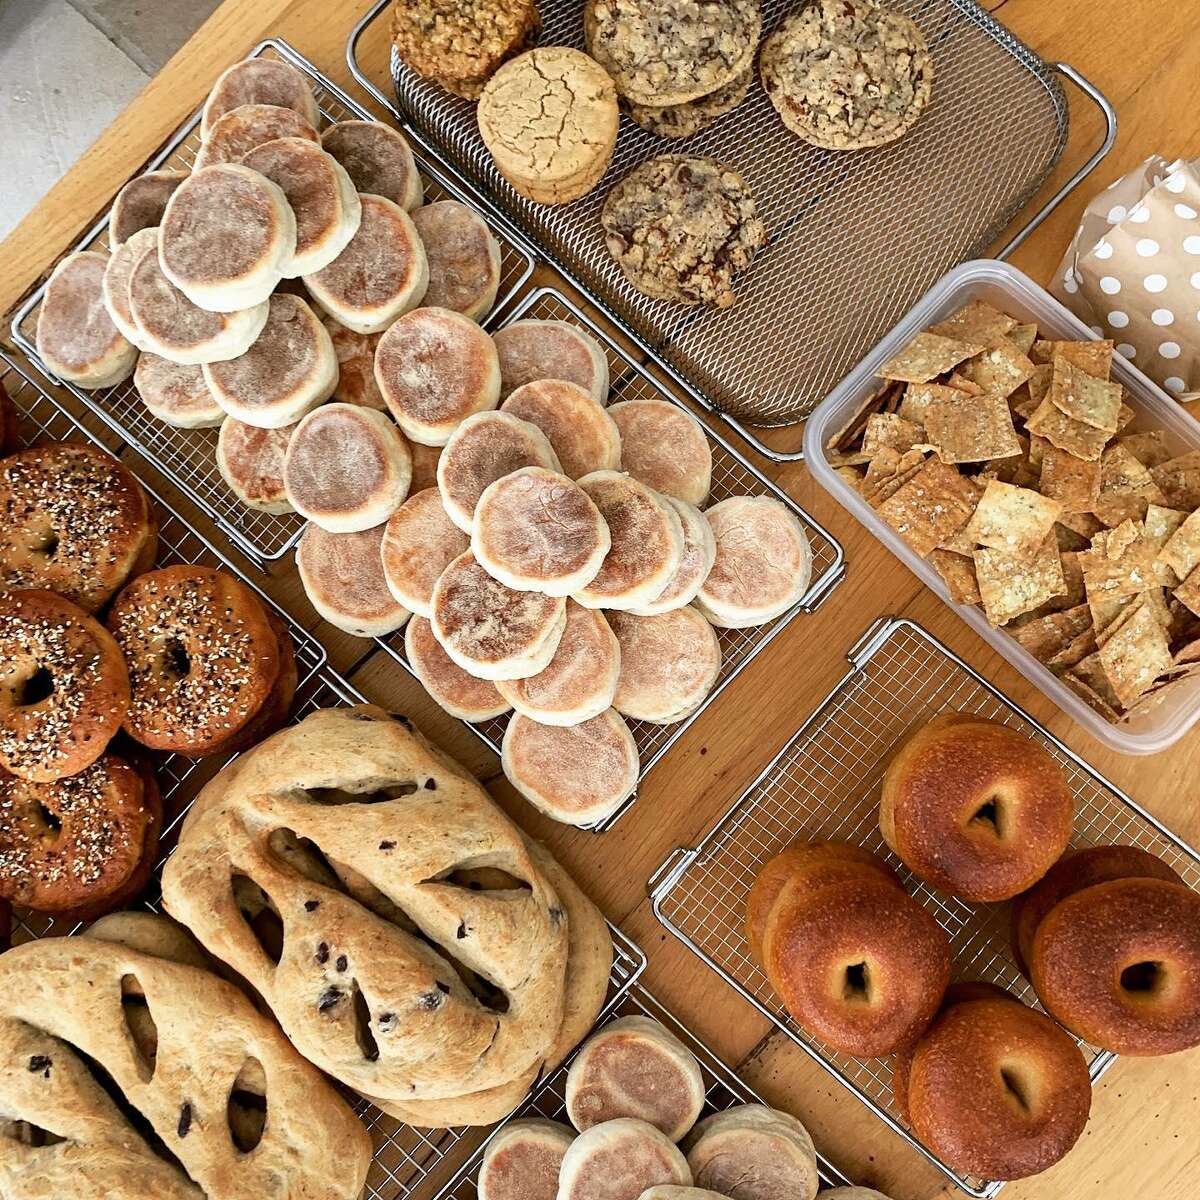 A sampling of what 5 Mile River Baking has to offer.